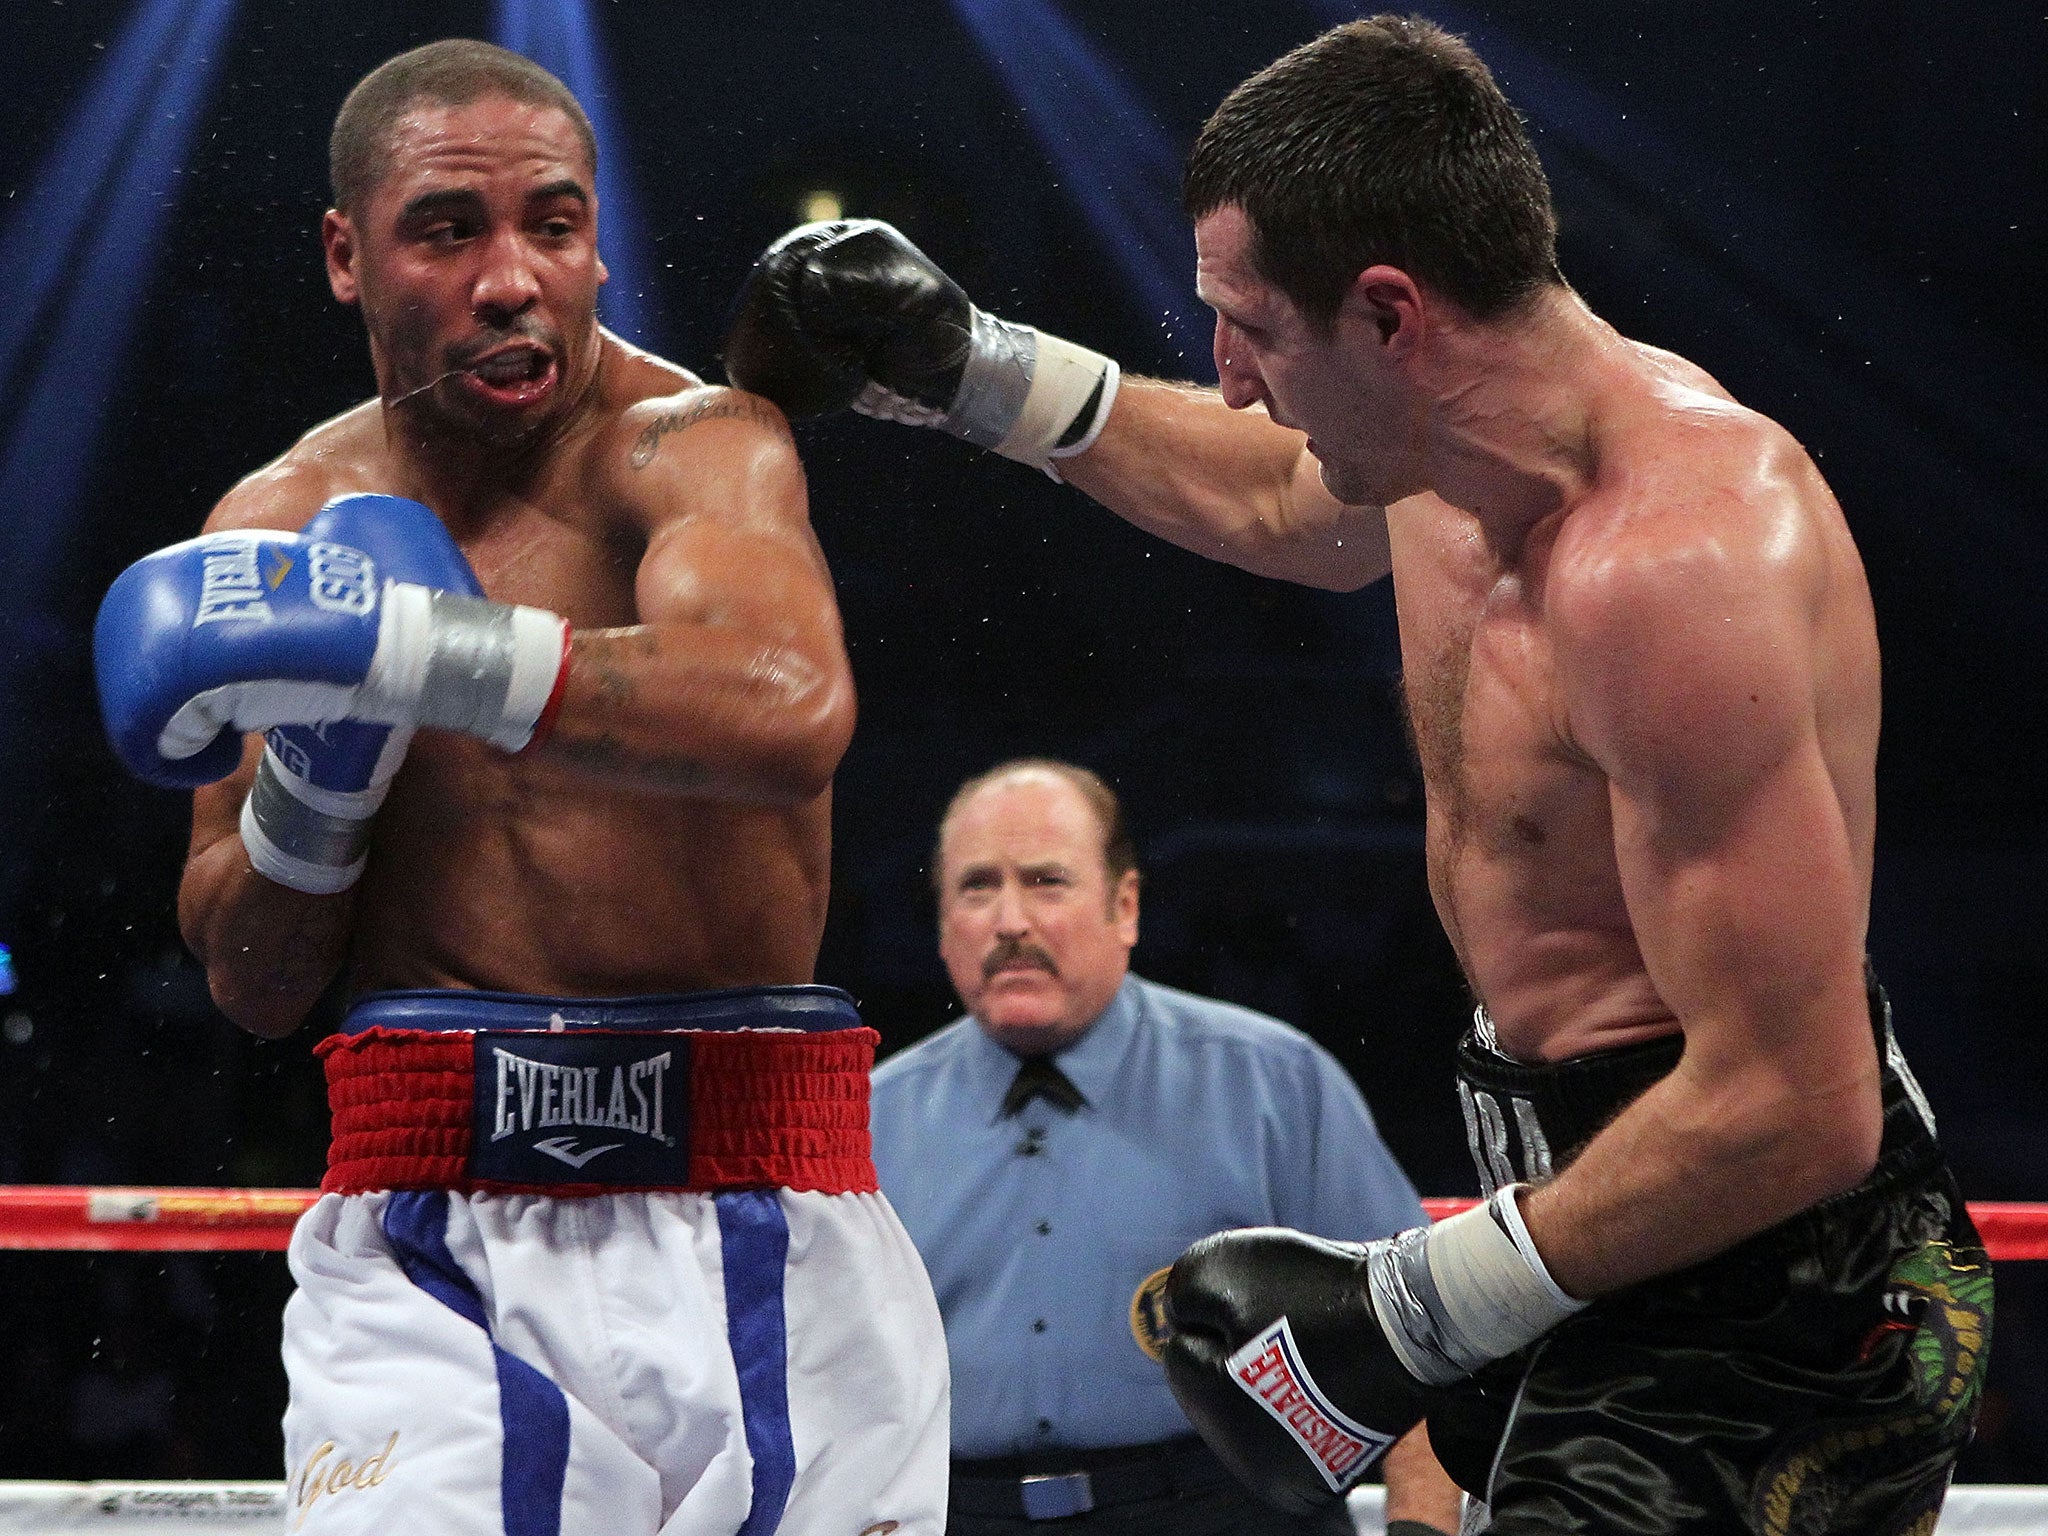 Was Sergey Kovalev robbed in his fight with Andre Ward? - Quora